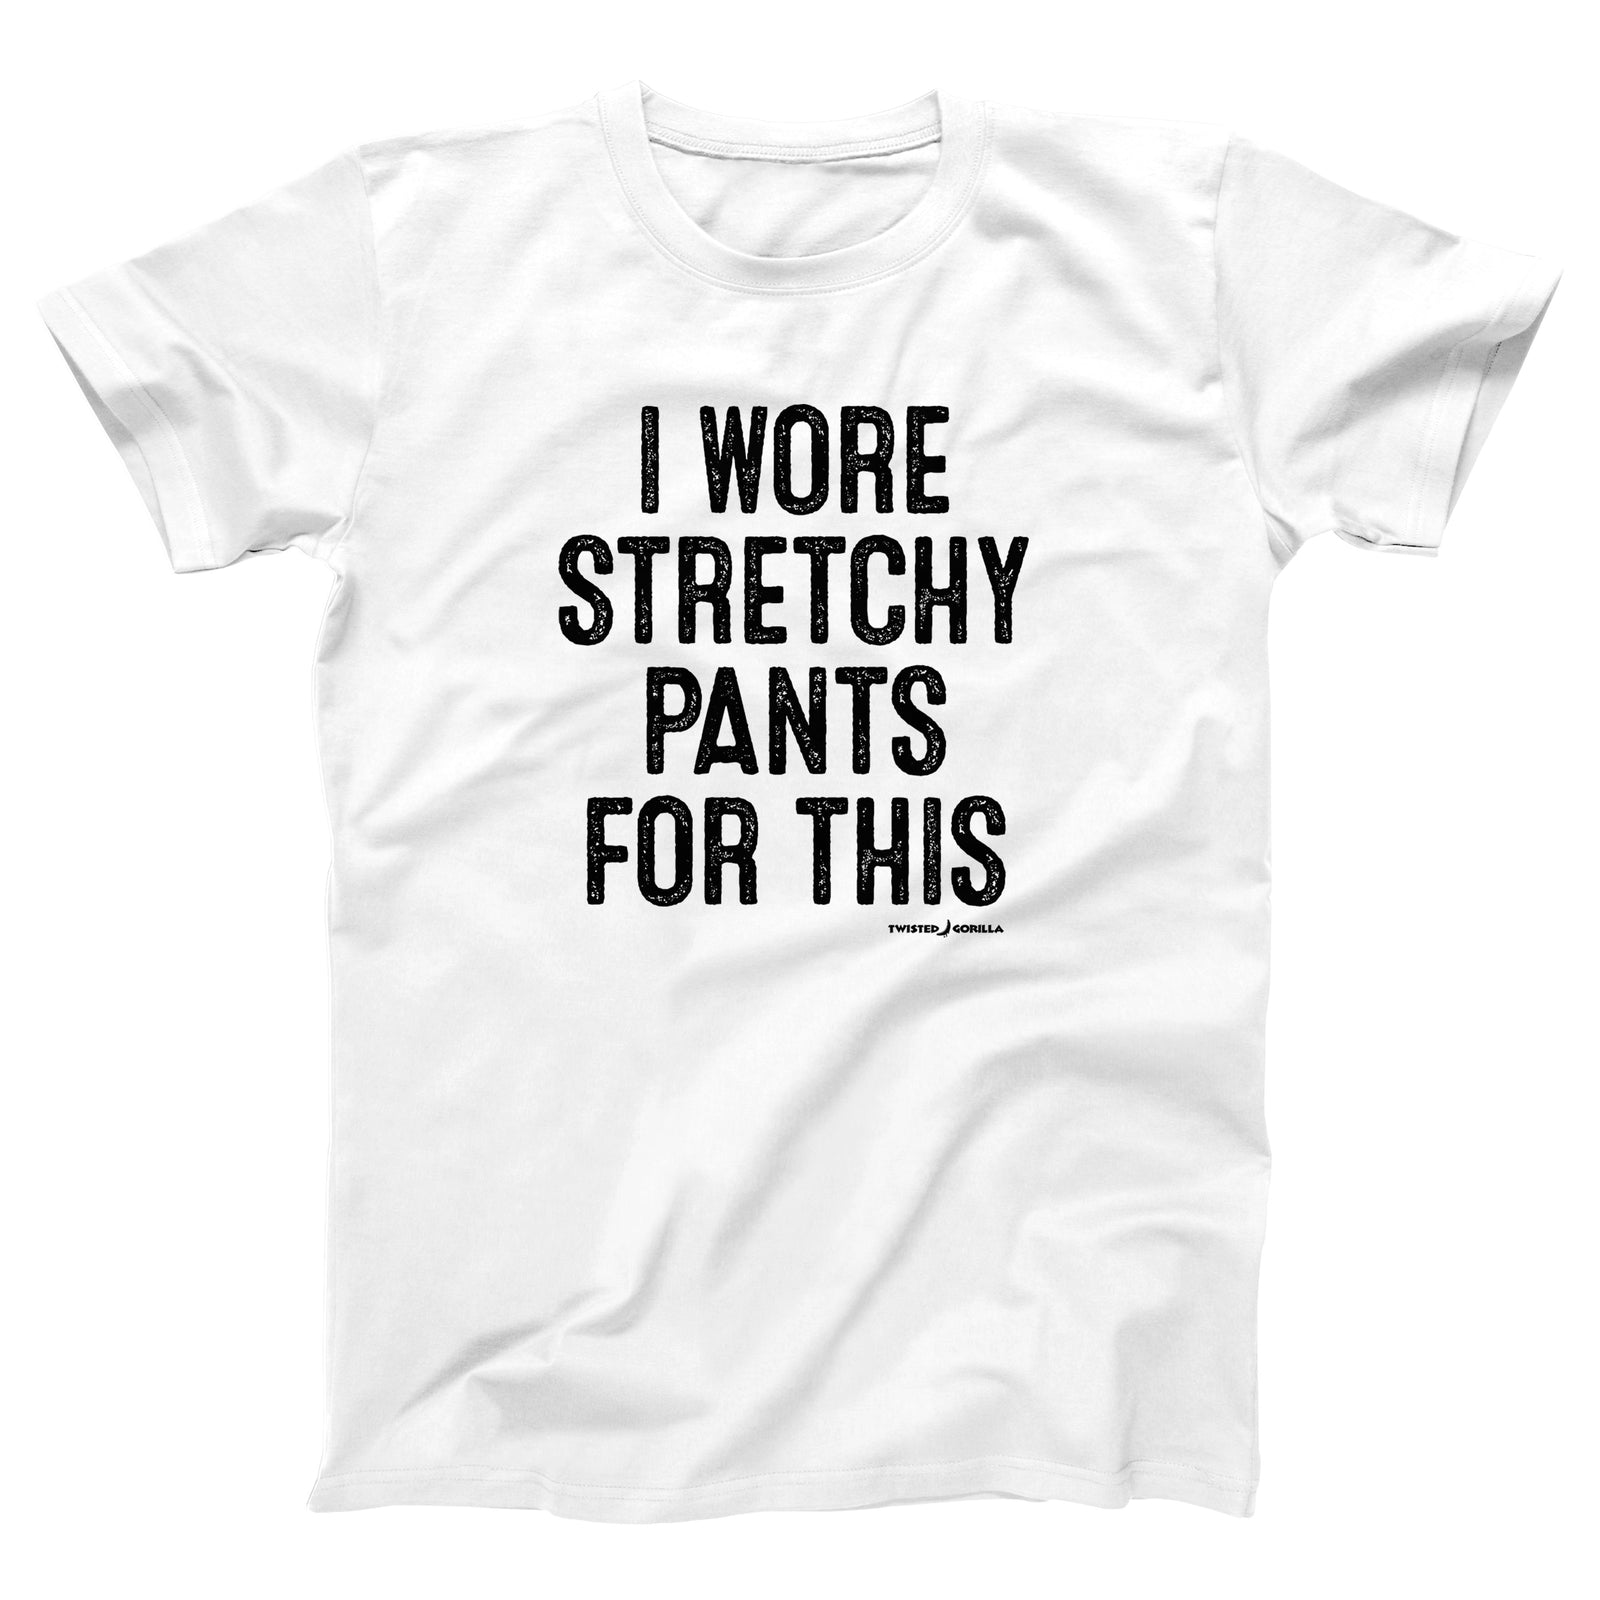 //cdn.shopify.com/s/files/1/0274/2488/2766/products/i-wore-stretchy-pants-for-this-menunisex-t-shirt-186394_5000x.jpg?v=1635558574 5000w,
    //cdn.shopify.com/s/files/1/0274/2488/2766/products/i-wore-stretchy-pants-for-this-menunisex-t-shirt-186394_4500x.jpg?v=1635558574 4500w,
    //cdn.shopify.com/s/files/1/0274/2488/2766/products/i-wore-stretchy-pants-for-this-menunisex-t-shirt-186394_4000x.jpg?v=1635558574 4000w,
    //cdn.shopify.com/s/files/1/0274/2488/2766/products/i-wore-stretchy-pants-for-this-menunisex-t-shirt-186394_3500x.jpg?v=1635558574 3500w,
    //cdn.shopify.com/s/files/1/0274/2488/2766/products/i-wore-stretchy-pants-for-this-menunisex-t-shirt-186394_3000x.jpg?v=1635558574 3000w,
    //cdn.shopify.com/s/files/1/0274/2488/2766/products/i-wore-stretchy-pants-for-this-menunisex-t-shirt-186394_2500x.jpg?v=1635558574 2500w,
    //cdn.shopify.com/s/files/1/0274/2488/2766/products/i-wore-stretchy-pants-for-this-menunisex-t-shirt-186394_2000x.jpg?v=1635558574 2000w,
    //cdn.shopify.com/s/files/1/0274/2488/2766/products/i-wore-stretchy-pants-for-this-menunisex-t-shirt-186394_1800x.jpg?v=1635558574 1800w,
    //cdn.shopify.com/s/files/1/0274/2488/2766/products/i-wore-stretchy-pants-for-this-menunisex-t-shirt-186394_1600x.jpg?v=1635558574 1600w,
    //cdn.shopify.com/s/files/1/0274/2488/2766/products/i-wore-stretchy-pants-for-this-menunisex-t-shirt-186394_1400x.jpg?v=1635558574 1400w,
    //cdn.shopify.com/s/files/1/0274/2488/2766/products/i-wore-stretchy-pants-for-this-menunisex-t-shirt-186394_1200x.jpg?v=1635558574 1200w,
    //cdn.shopify.com/s/files/1/0274/2488/2766/products/i-wore-stretchy-pants-for-this-menunisex-t-shirt-186394_1000x.jpg?v=1635558574 1000w,
    //cdn.shopify.com/s/files/1/0274/2488/2766/products/i-wore-stretchy-pants-for-this-menunisex-t-shirt-186394_800x.jpg?v=1635558574 800w,
    //cdn.shopify.com/s/files/1/0274/2488/2766/products/i-wore-stretchy-pants-for-this-menunisex-t-shirt-186394_600x.jpg?v=1635558574 600w,
    //cdn.shopify.com/s/files/1/0274/2488/2766/products/i-wore-stretchy-pants-for-this-menunisex-t-shirt-186394_400x.jpg?v=1635558574 400w,
    //cdn.shopify.com/s/files/1/0274/2488/2766/products/i-wore-stretchy-pants-for-this-menunisex-t-shirt-186394_200x.jpg?v=1635558574 200w